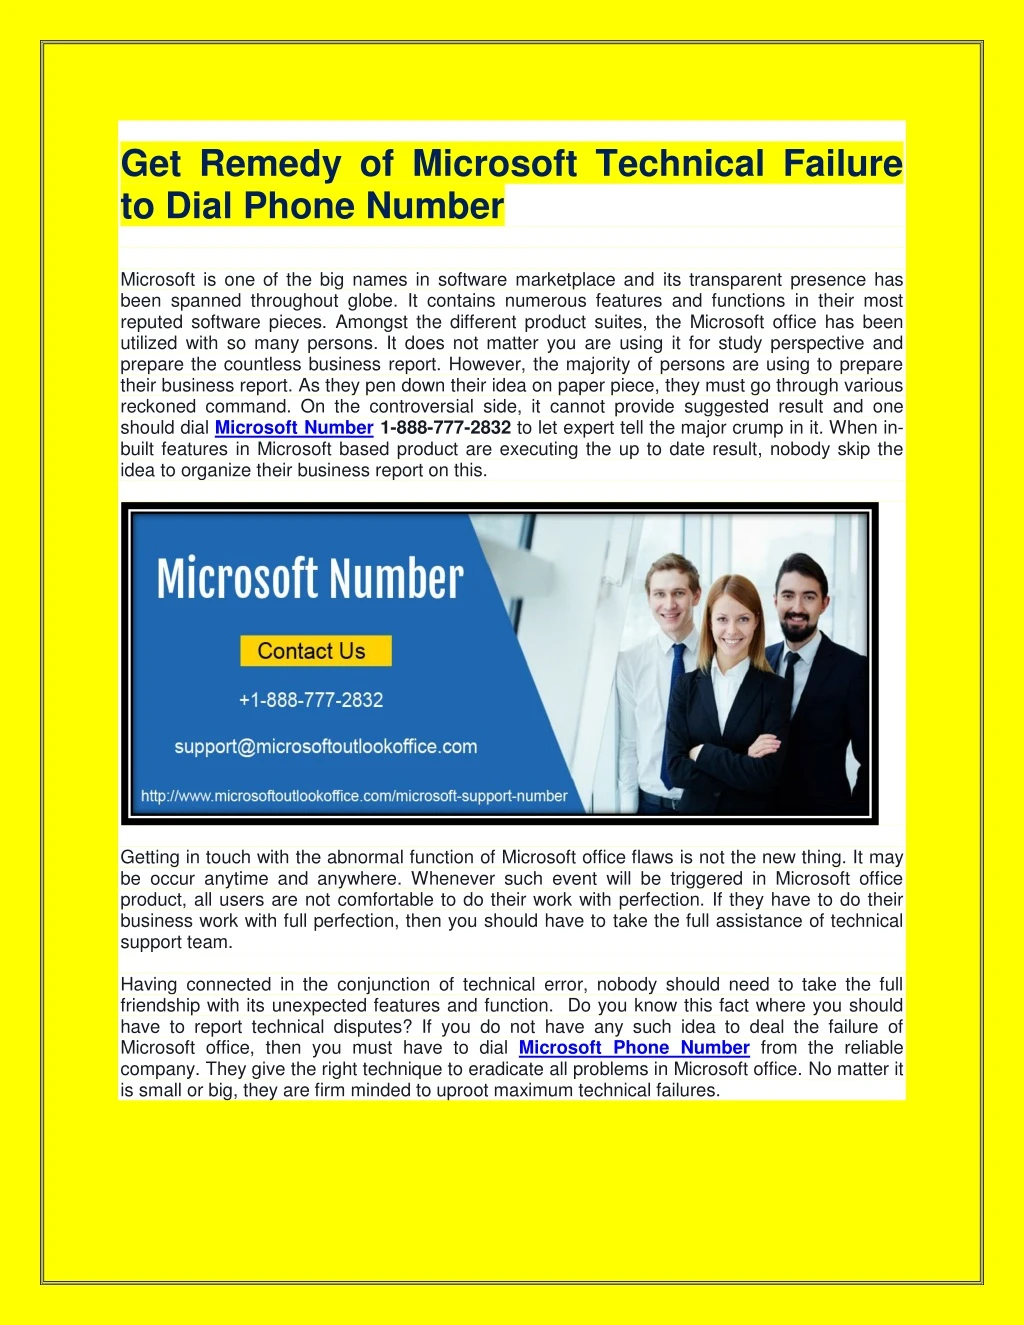 get remedy of microsoft technical failure to dial